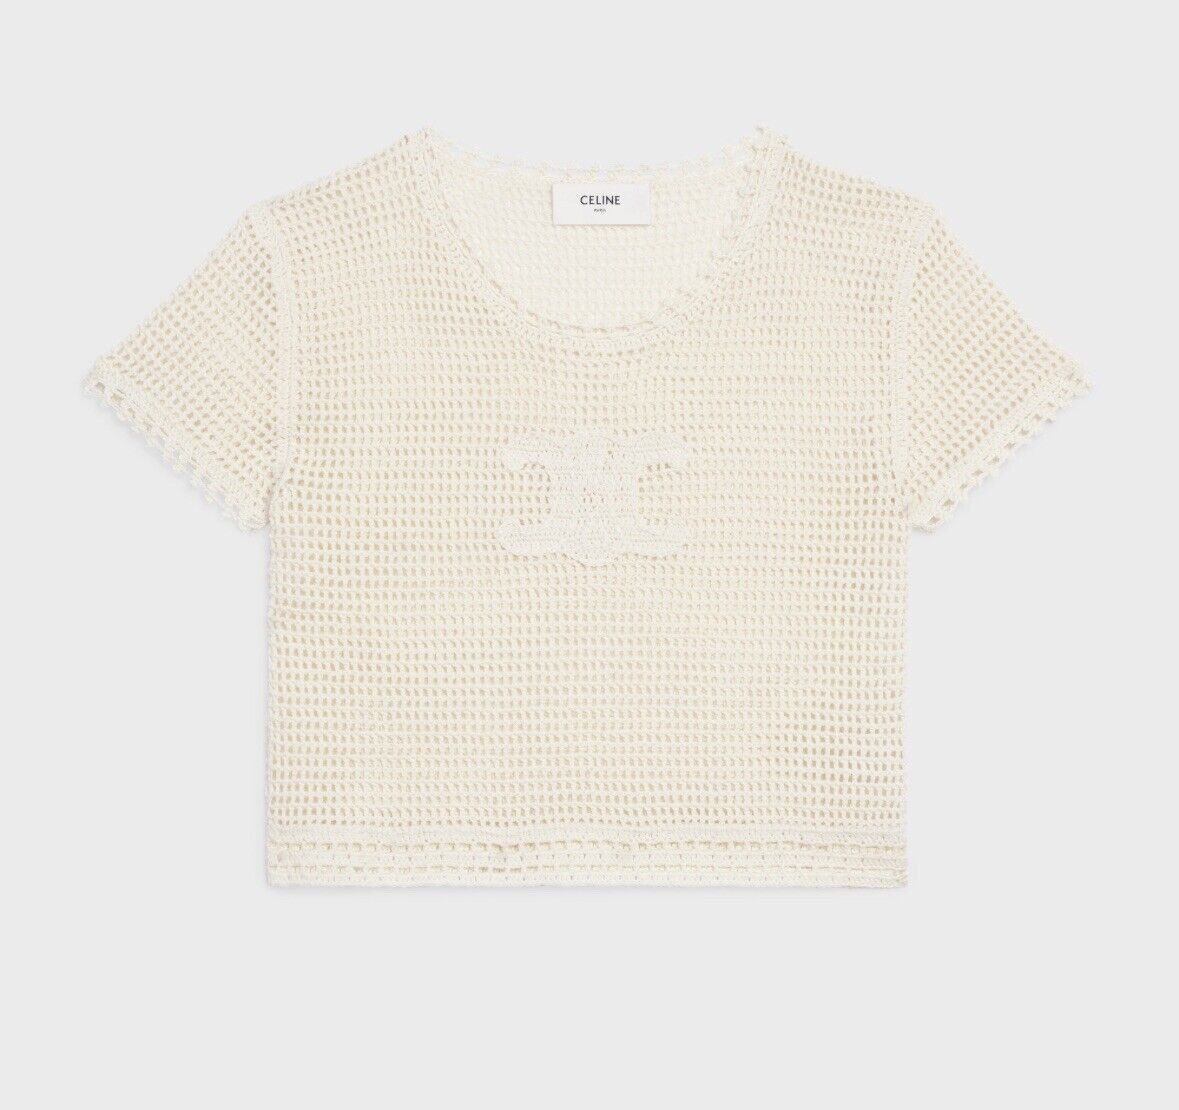 Celine TRIOMPHE T-SHIRT IN CROCHETED COTTON OFF WHITE - size XS | eBay US